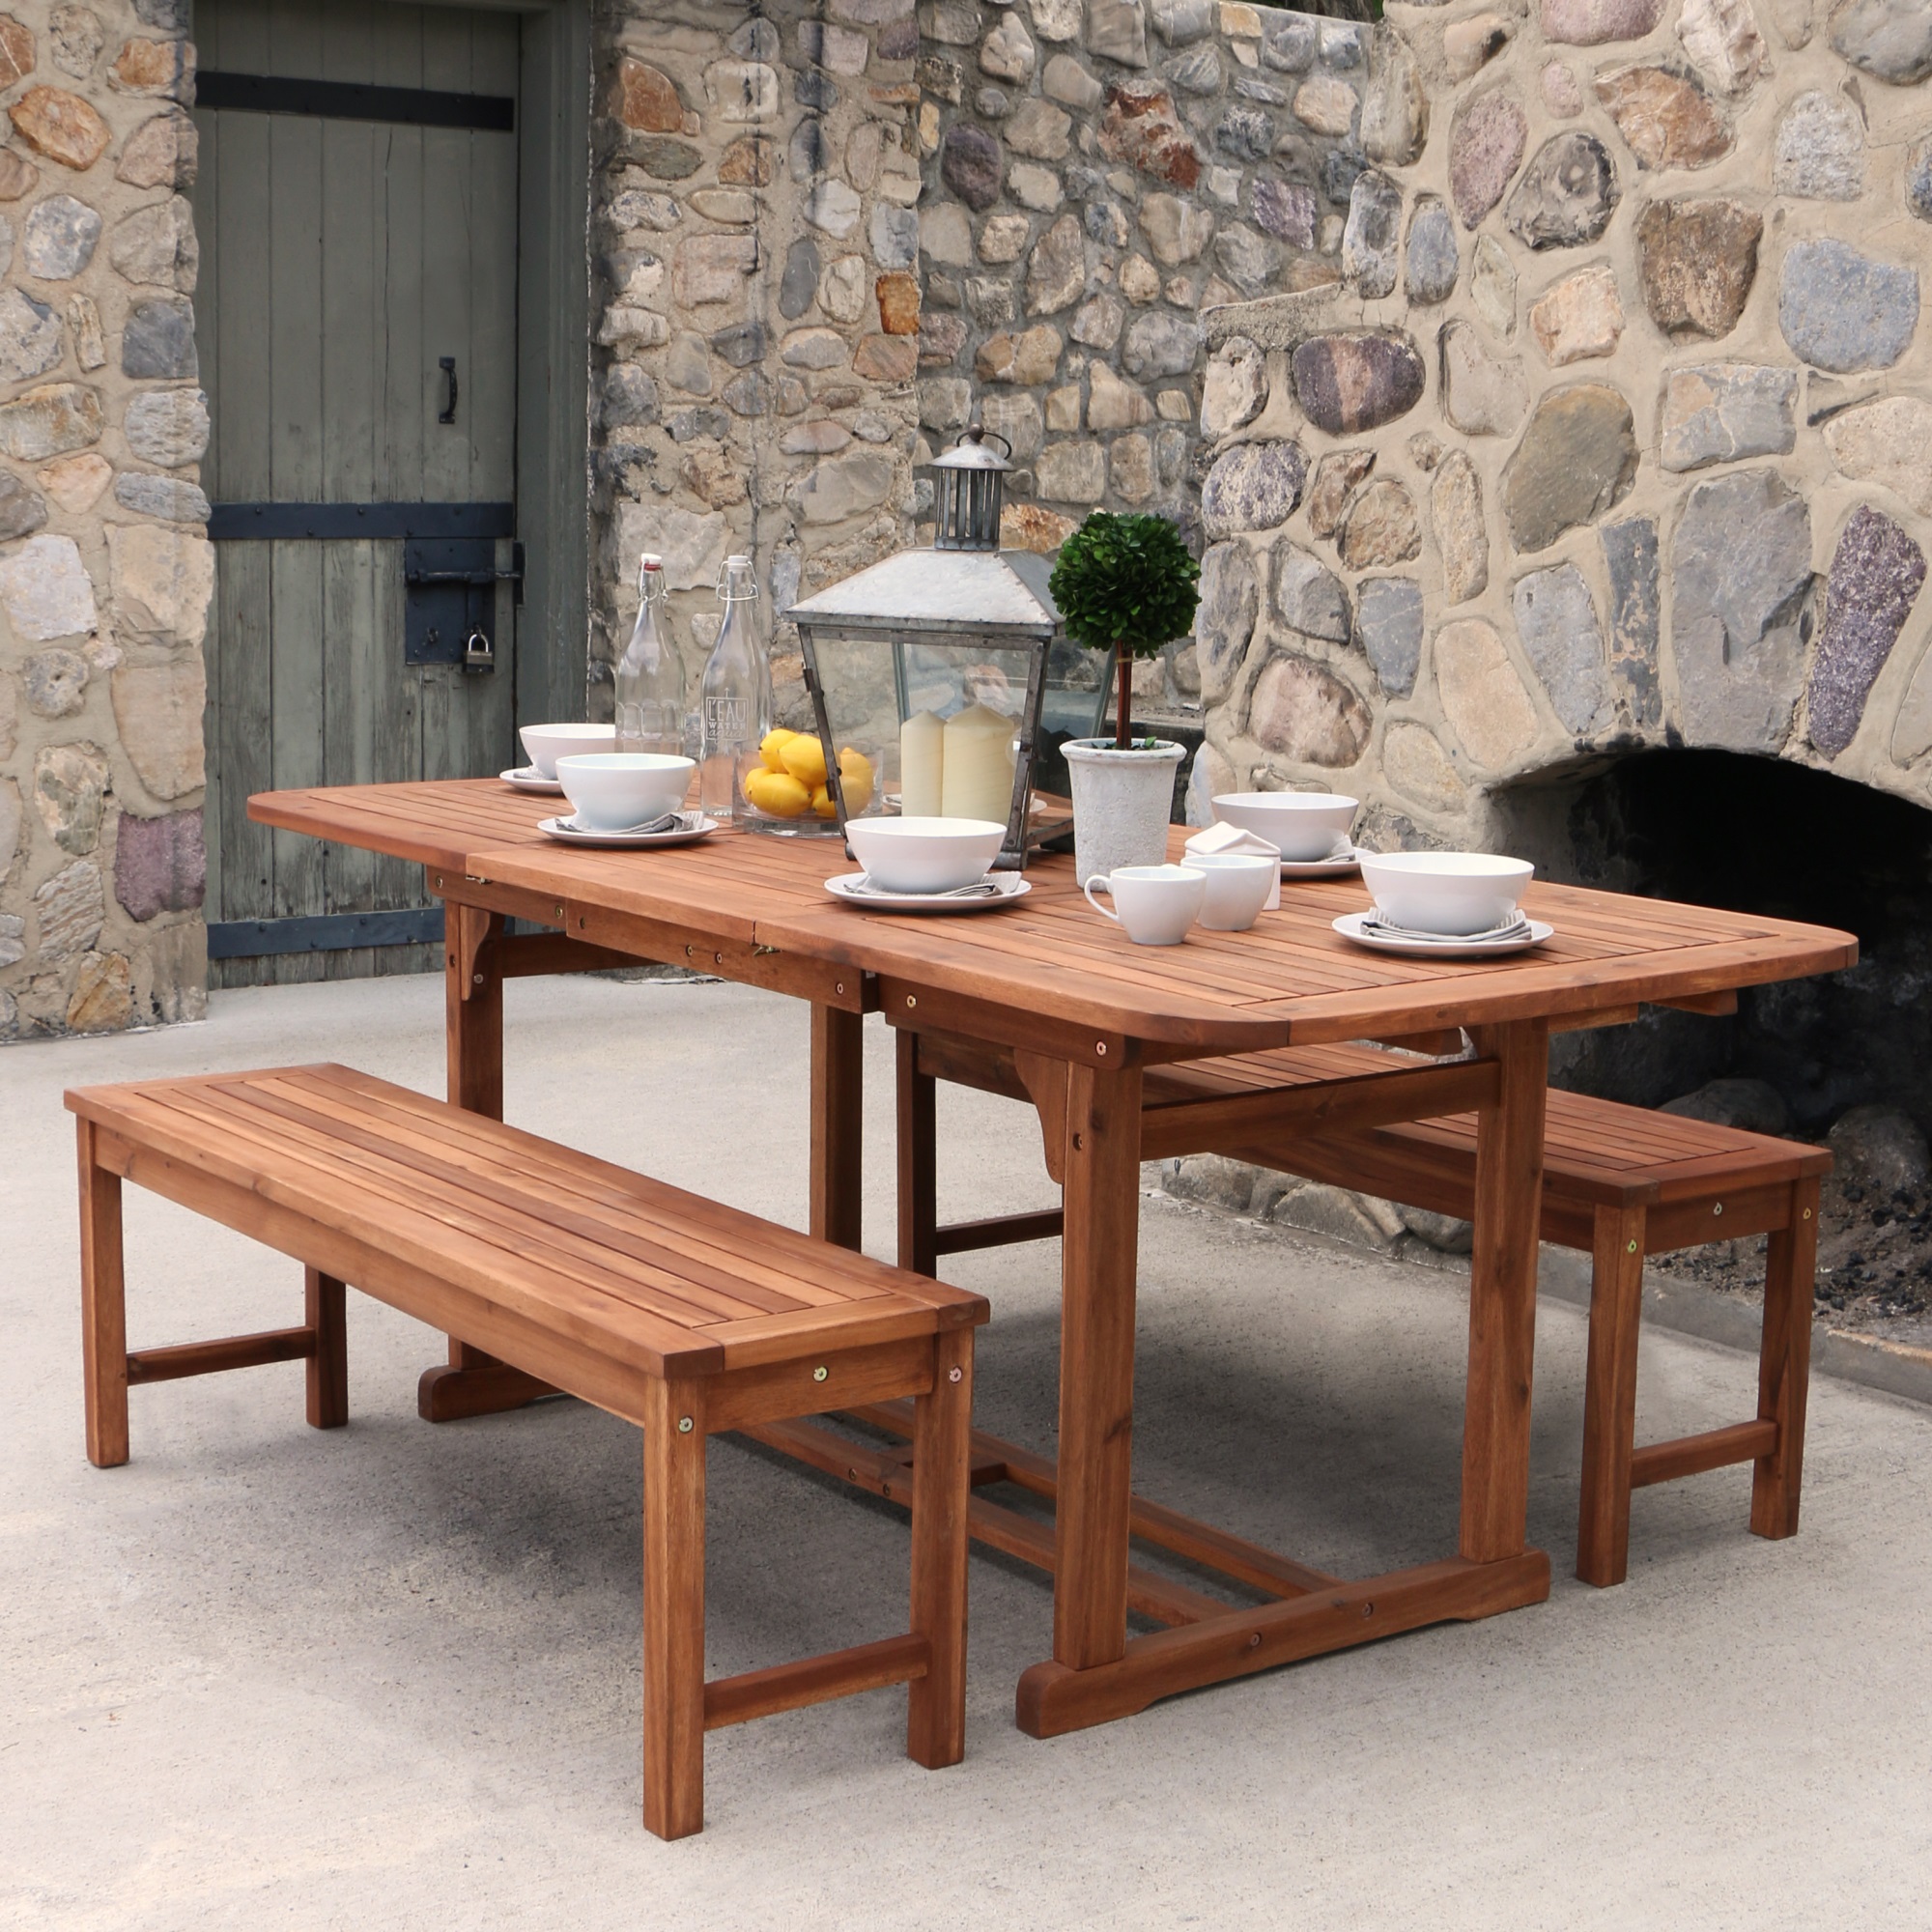 Ergode OW3SBR-2BT 3-Piece Brown Acacia Patio Dining Set - Solid Hardwood Construction, Hide-Away Butterfly Leaf, 3-Seater Bench